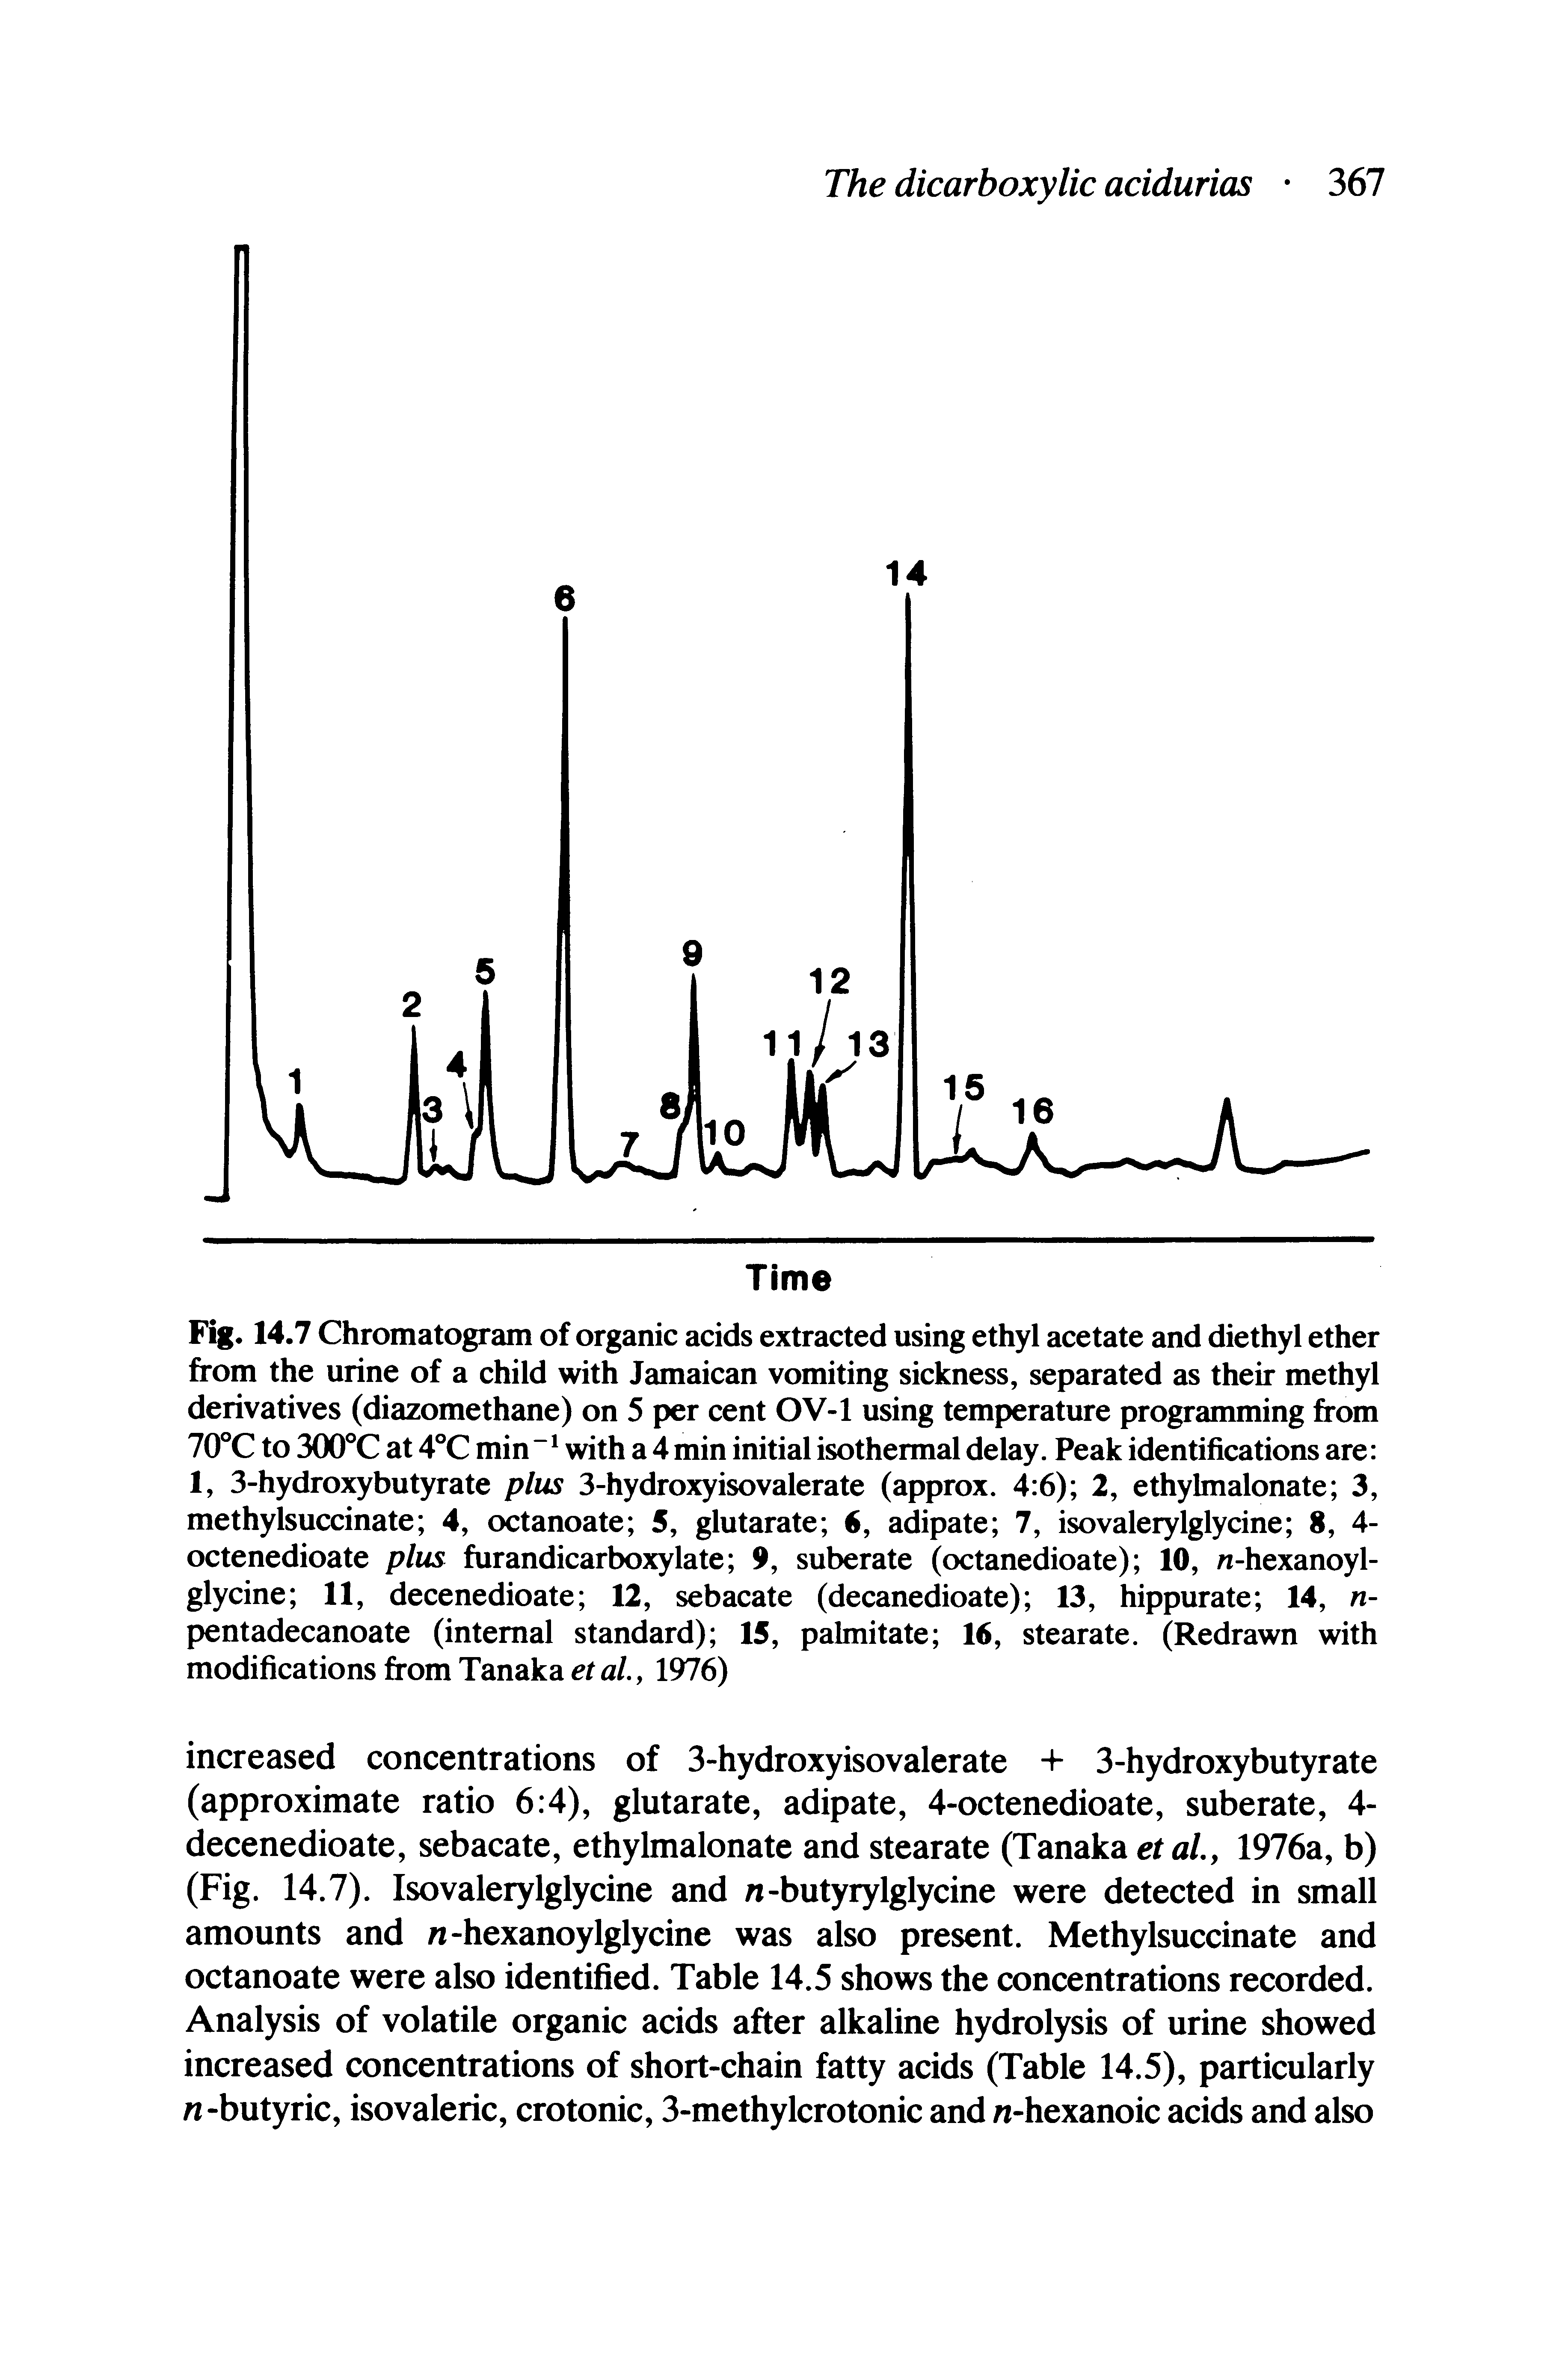 Fig. 14.7 Chromatogram of organic acids extracted using ethyl acetate and diethyl ether from the urine of a child with Jamaican vomiting sickness, separated as their methyl derivatives (diazomethane) on 5 per cent OV-1 using temperature programming from 70°C to 300°C at 4°C min with a 4 min initial isothermal delay. Peak identifications are 1, 3-hydroxybutyrate plus 3-hydroxyisovalerate (approx. 4 6) 2, ethylmalonate 3, methylsuccinate 4, octanoate 5, glutarate 6, adipate 7, isovalerylglycine 8, 4-octenedioate plus furandicarboxylate 9, suberate (octanedioate) 10, /i-hexanoyl-glycine 11, decenedioate 12, sebacate (decanedioate) 13, hippurate 14, n-pentadecanoate (internal standard) 15, palmitate 16, stearate. (Redrawn with modifications from Tanaka et al, 1976)...